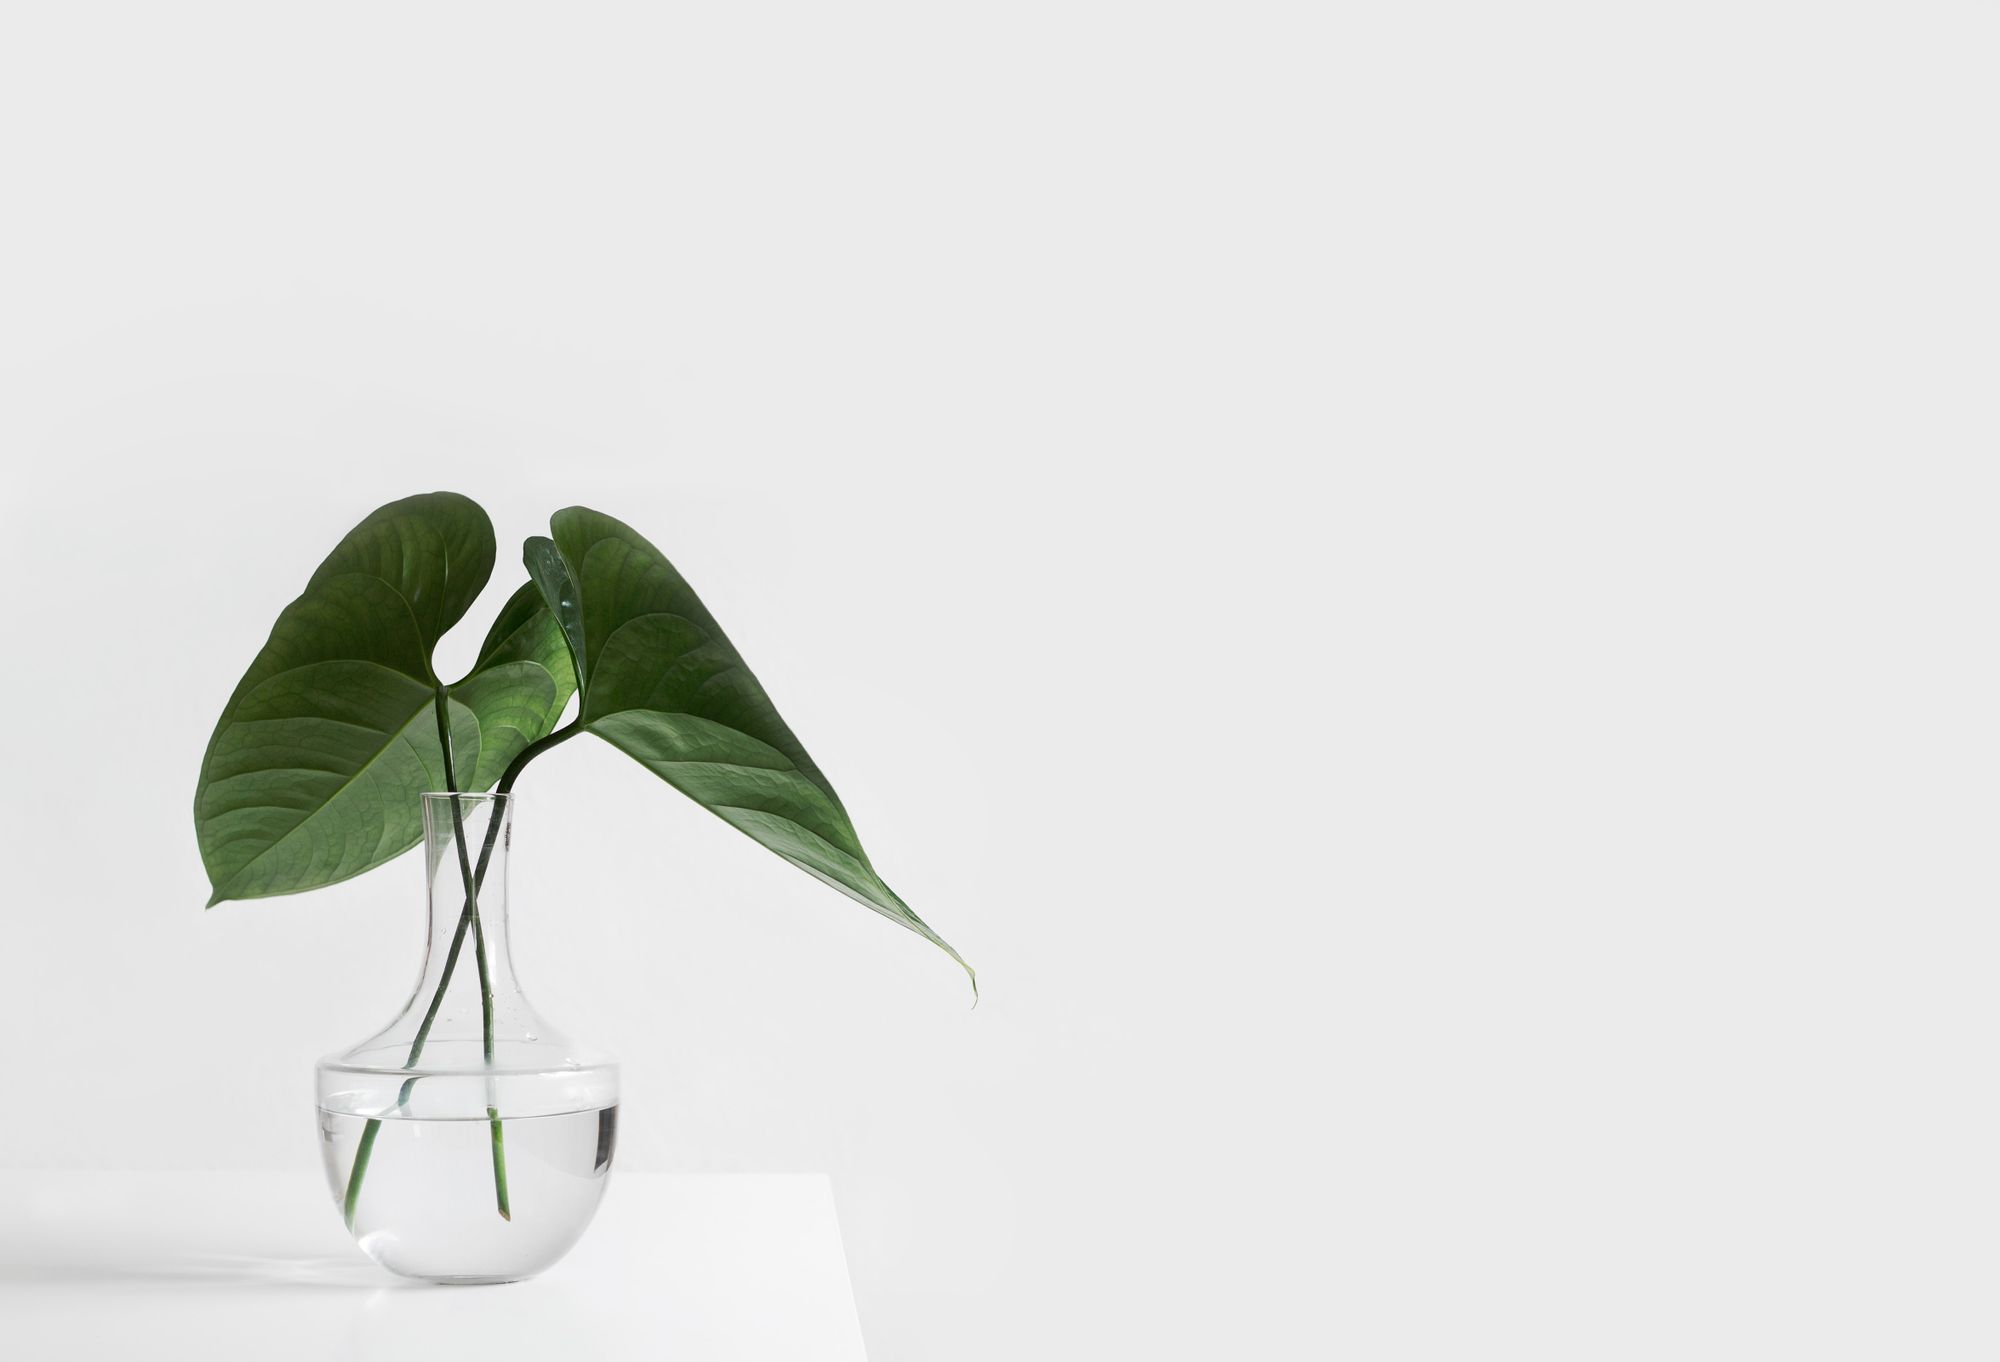 Plant in a glass jar in a corner in an otherwise white, minimal backdrop.